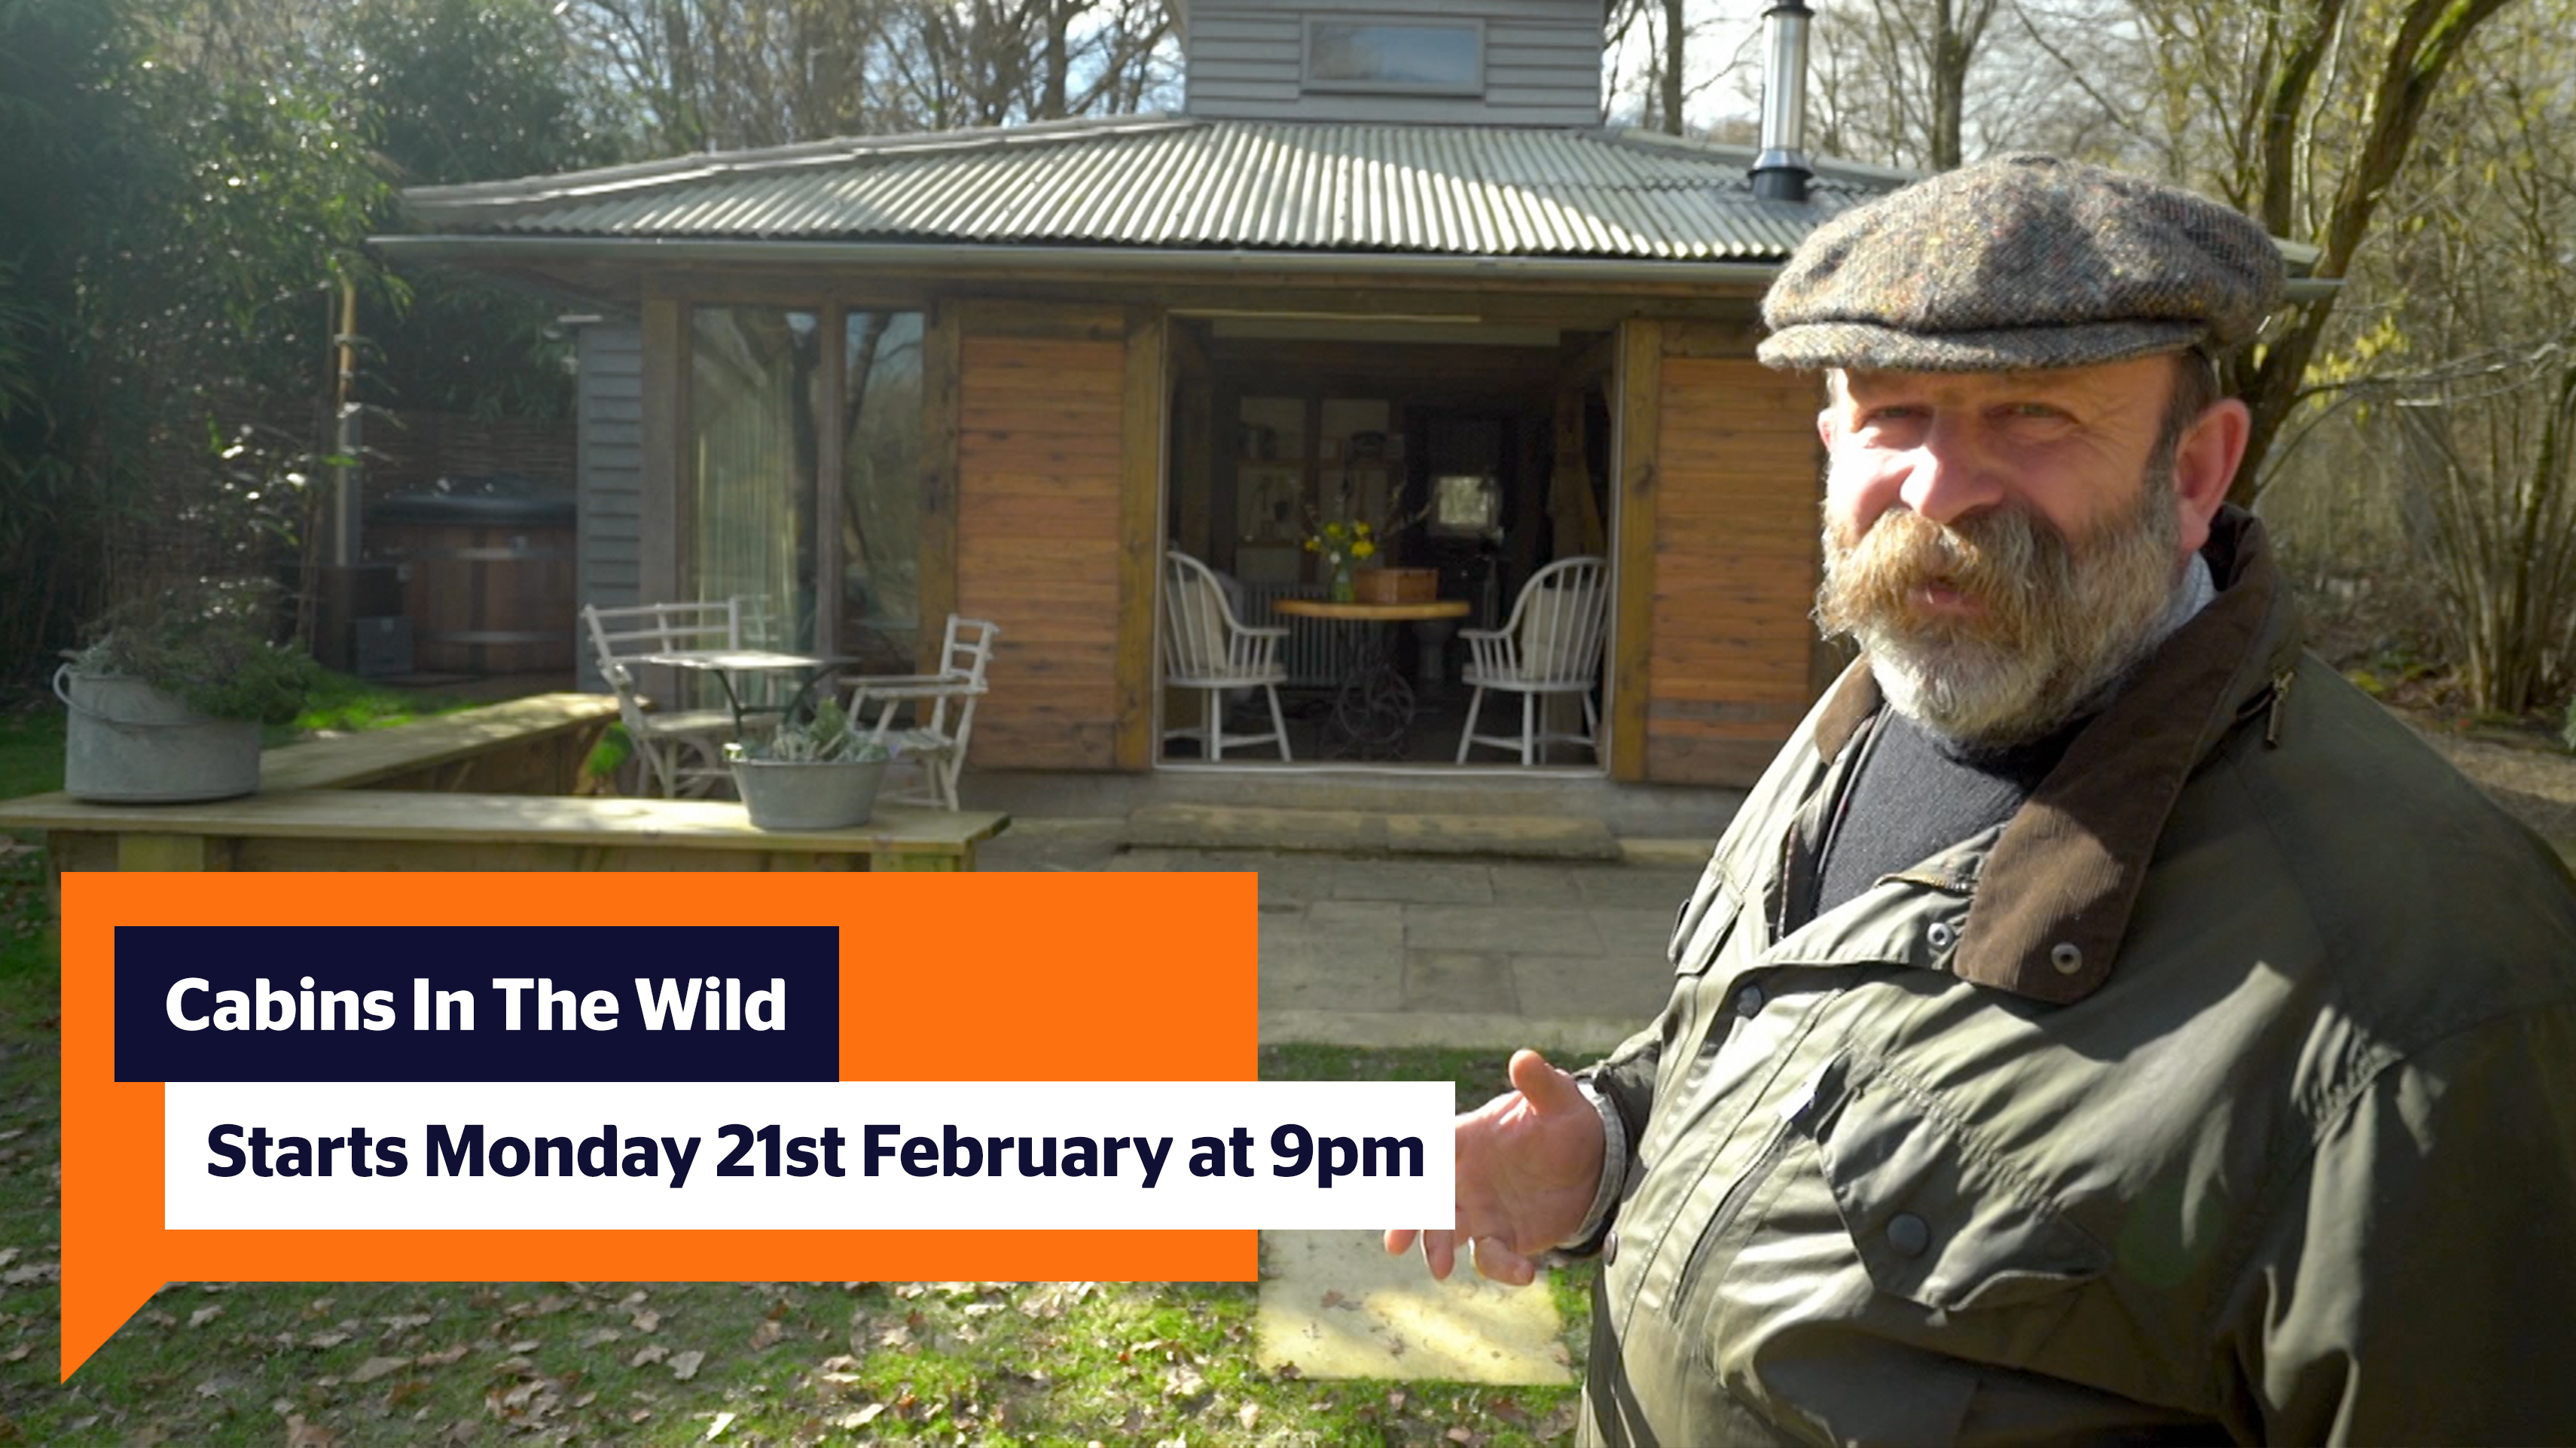 Cabins in the wild starts Monday 21st February at 9pm